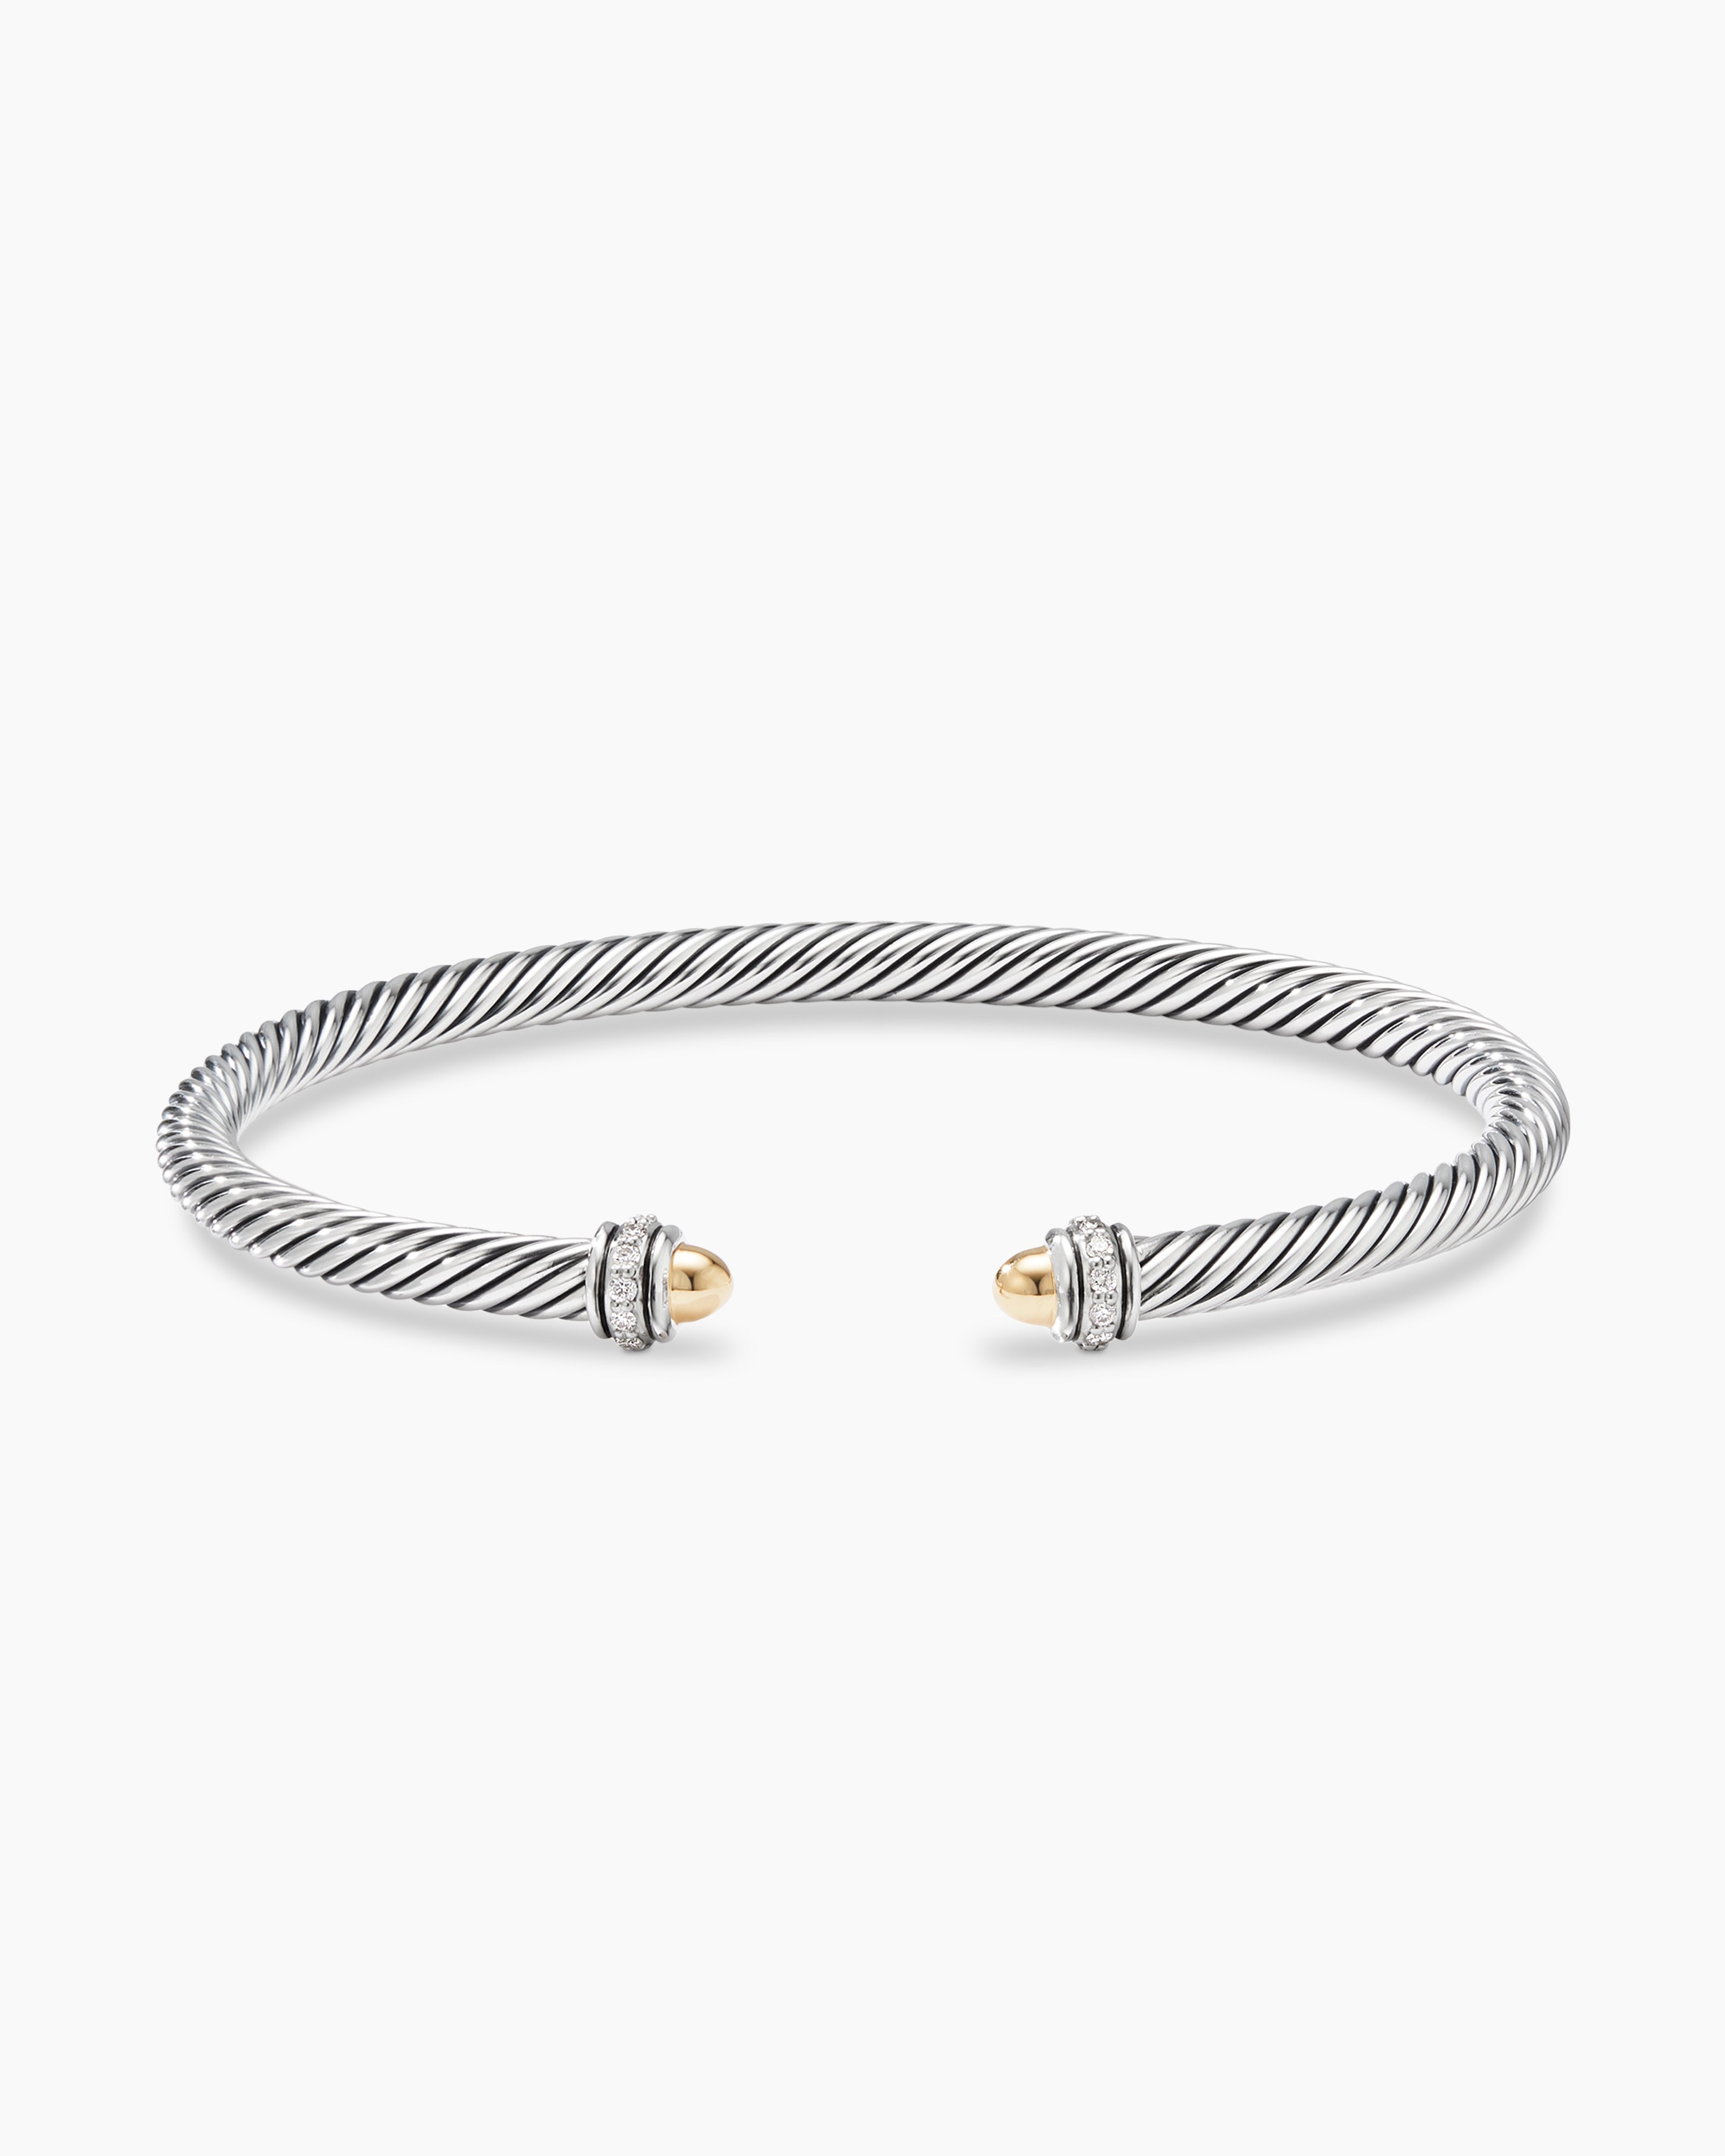 X Classic Cable Station Bracelet in Sterling Silver with 14K Yellow Gold,  5mm | David Yurman